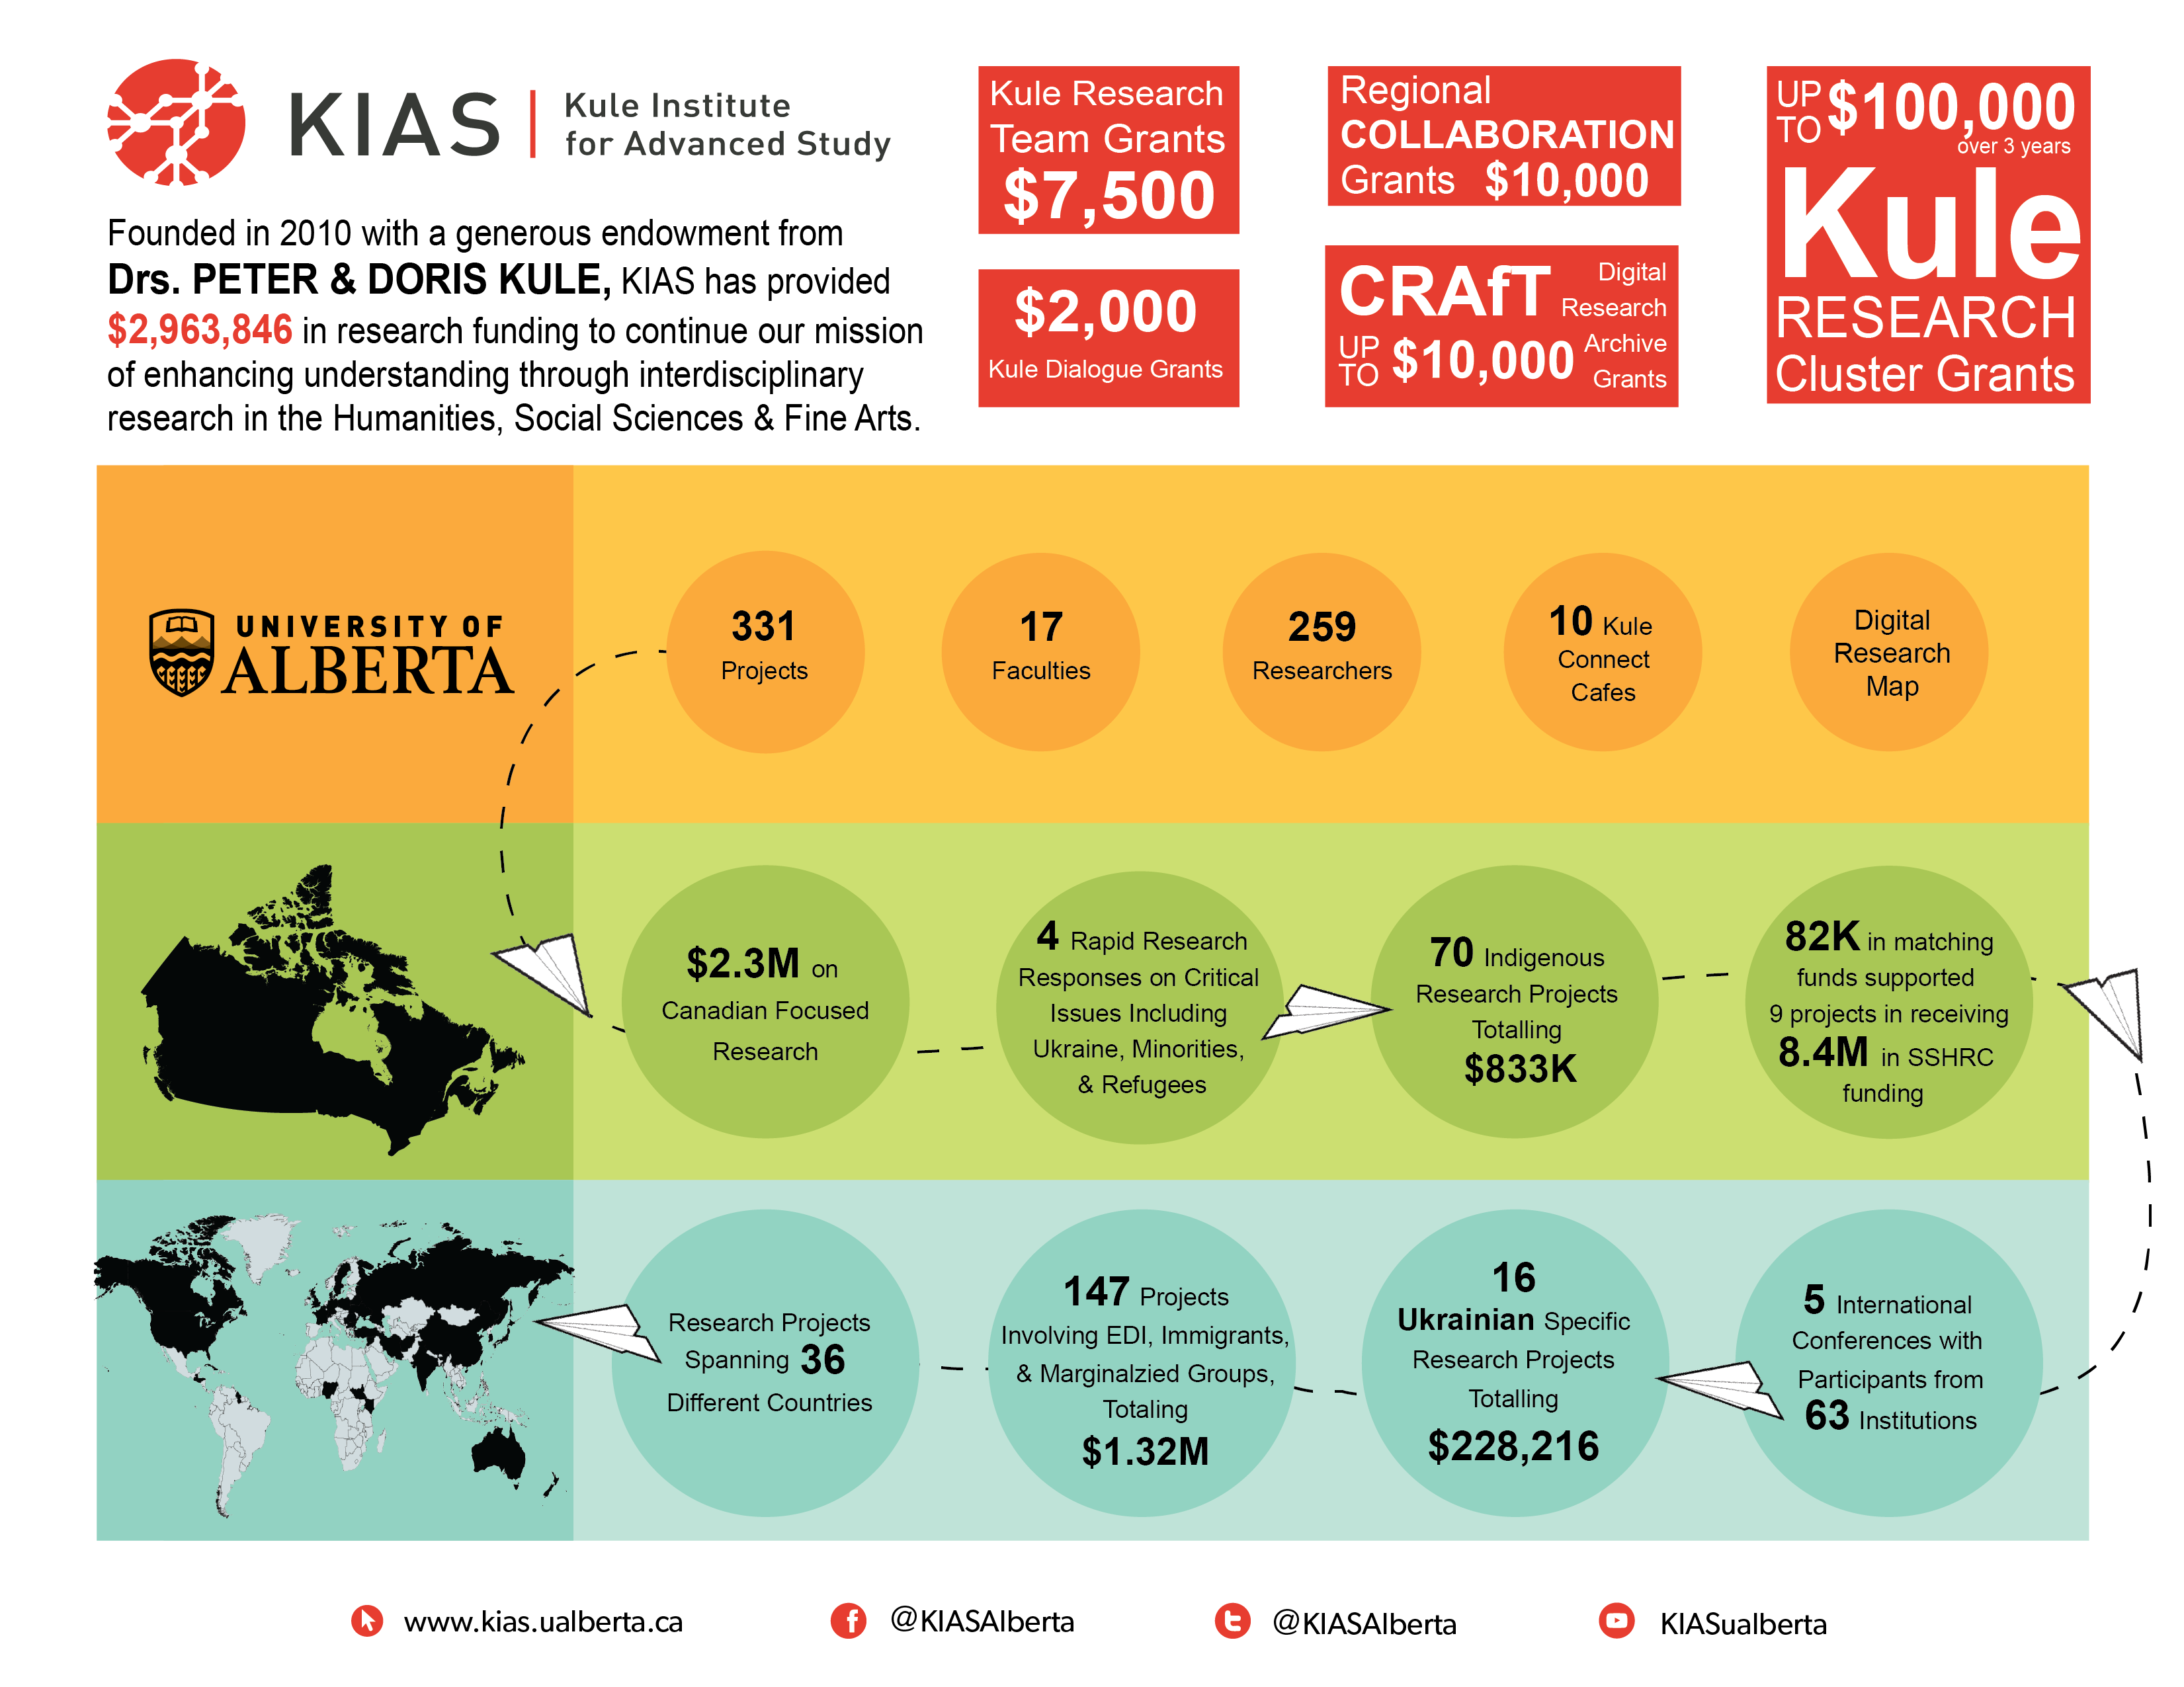 Snapshot of KIAS activities and achievements as of March 31, 2017.